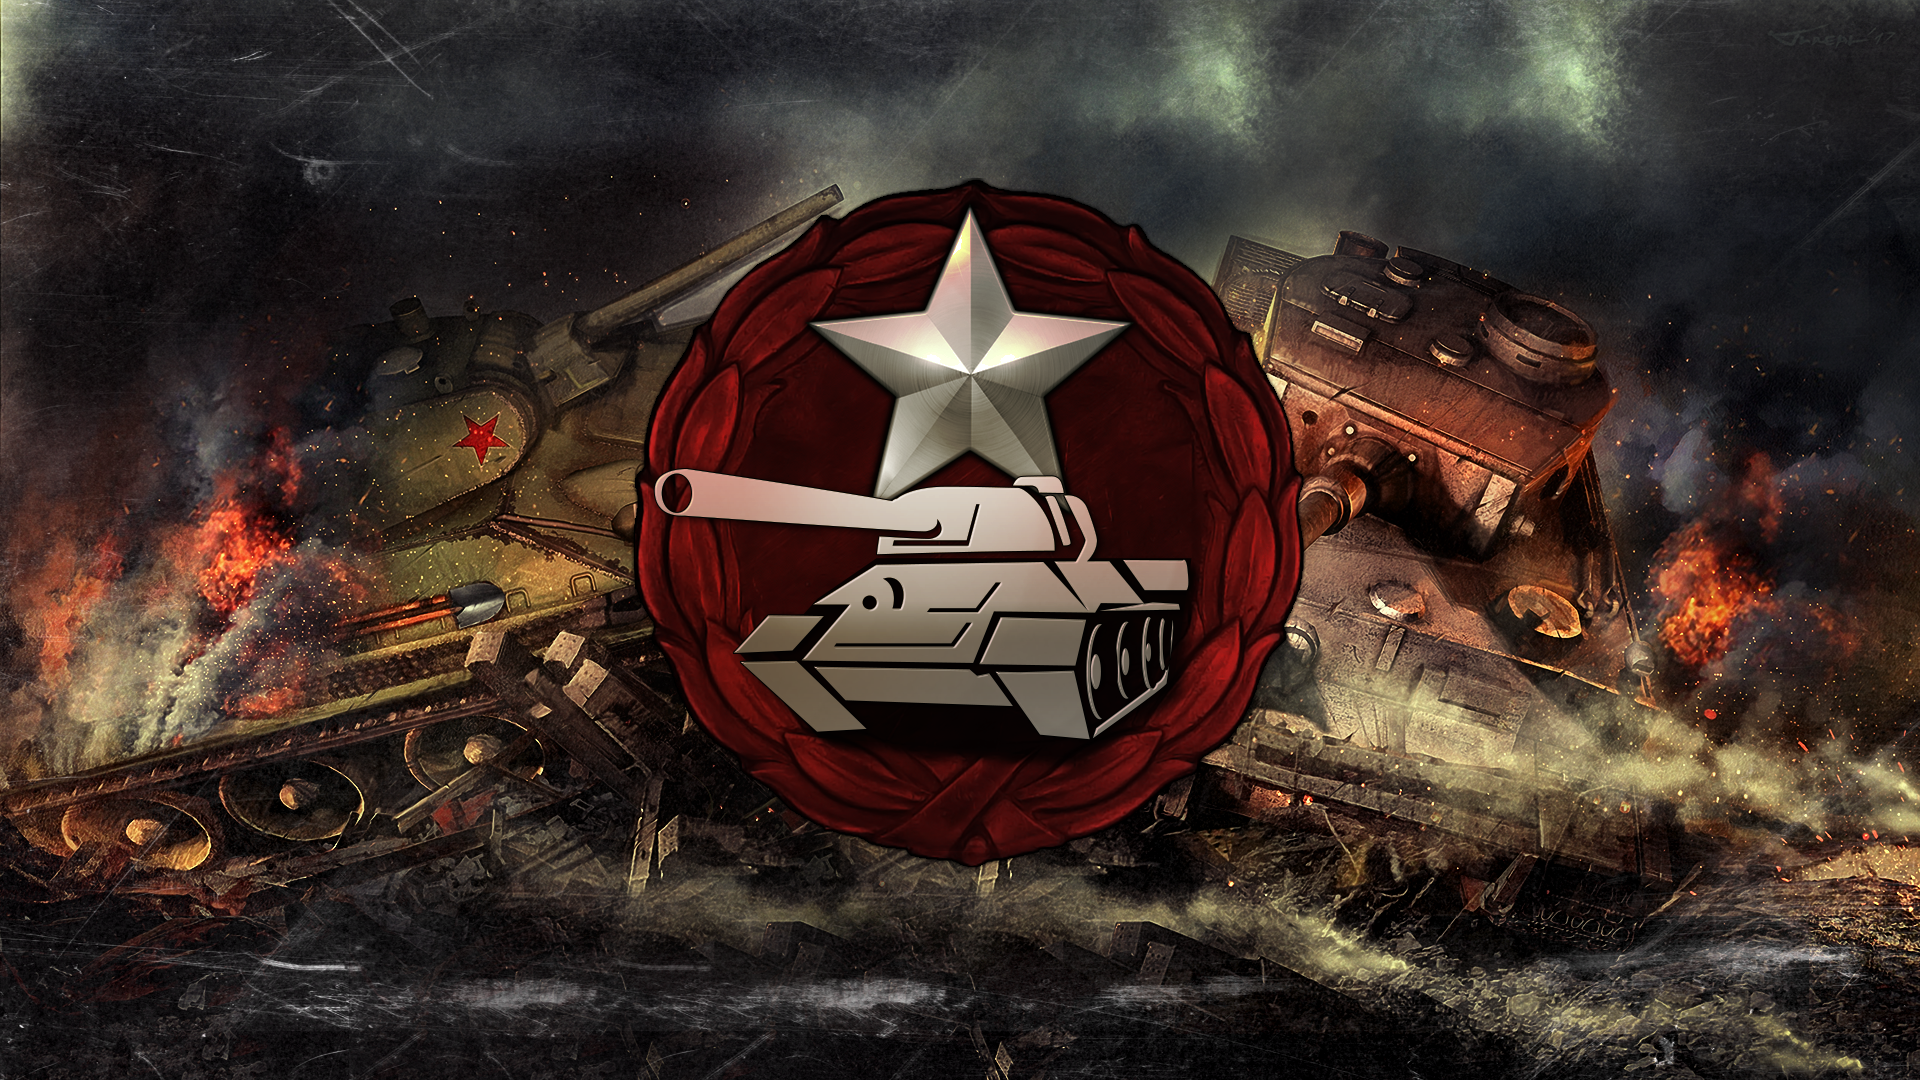 Icon for Glory to the Red Army